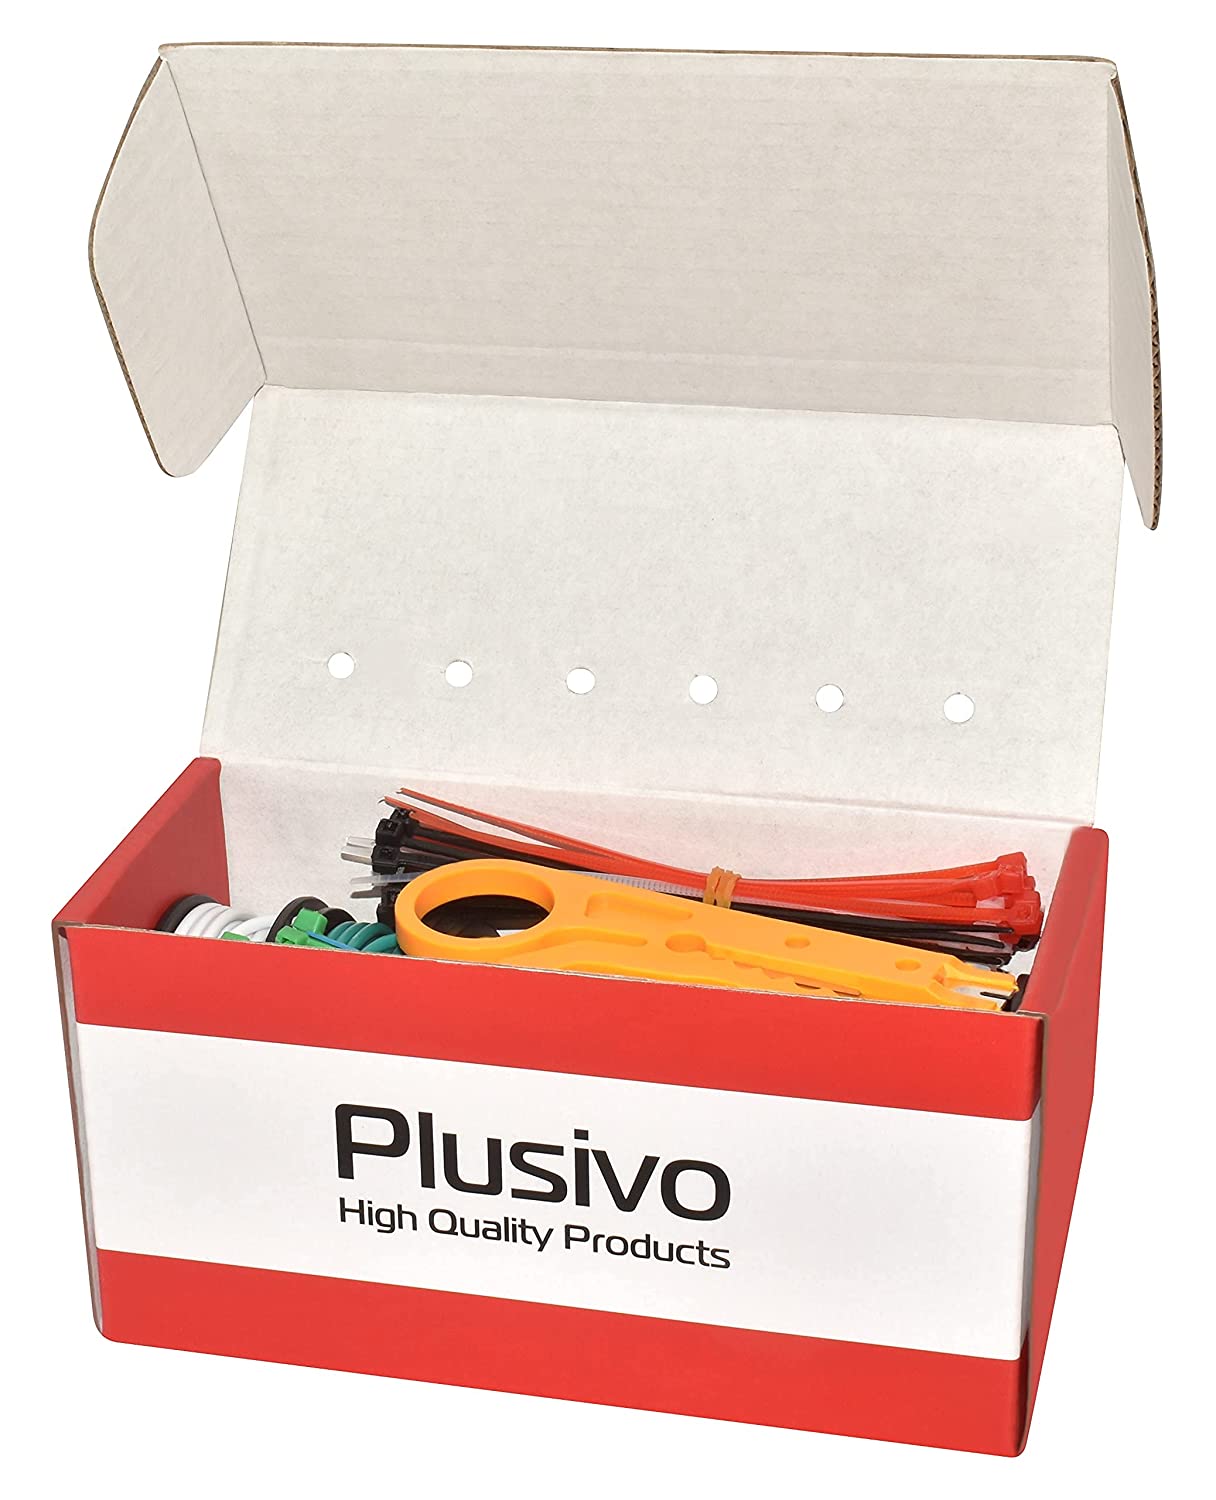 Plusivo 18AWG Hook up Wire Kit – 600V Pre-Tinned Solid Core Wire of 6 Colors x 5M